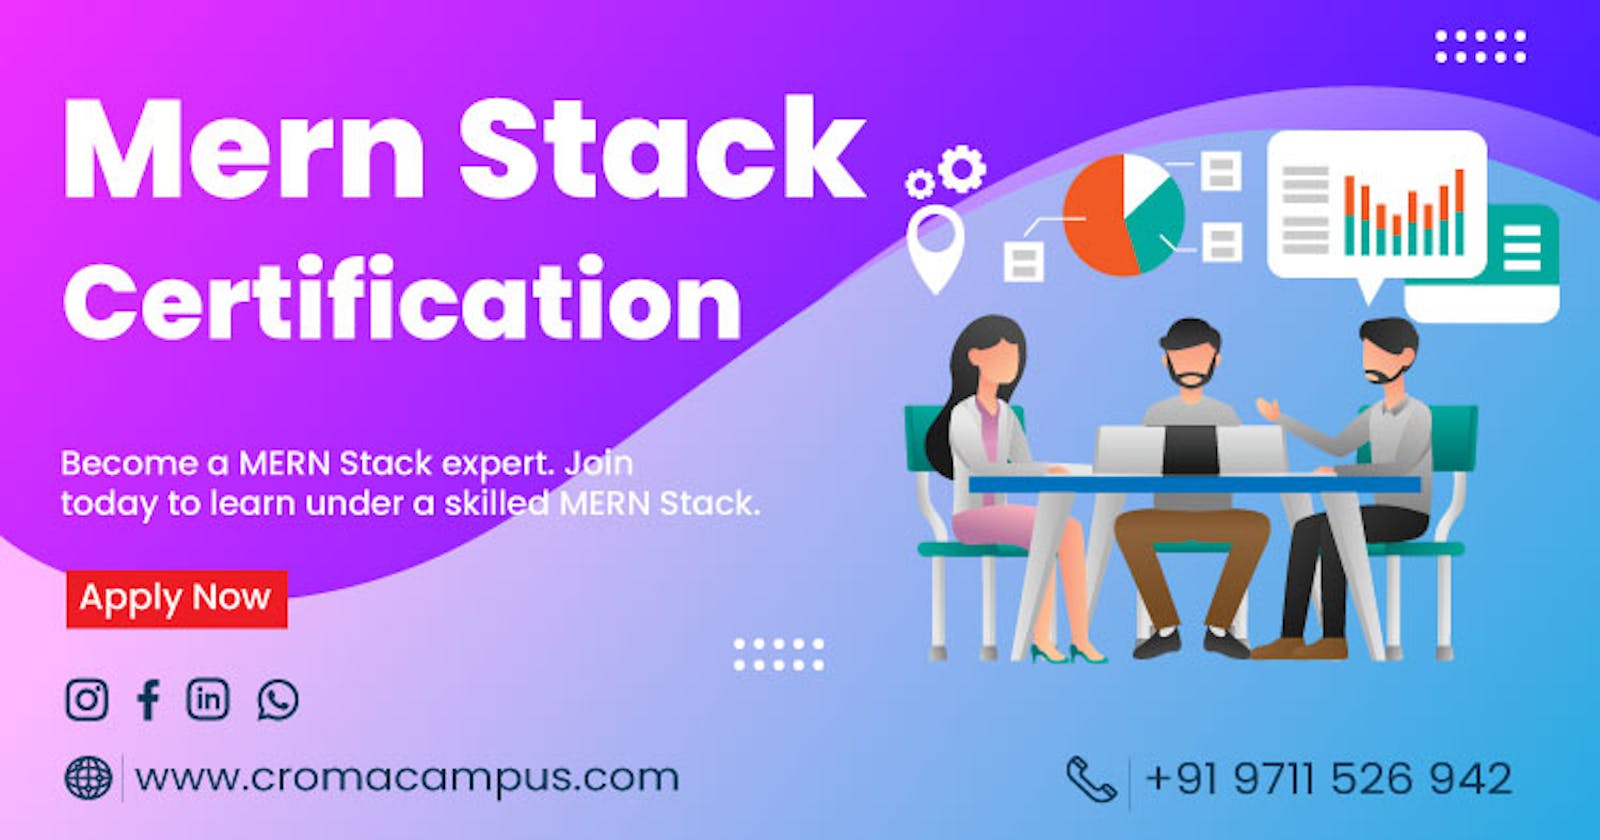 What are the Components of MERN Stack?